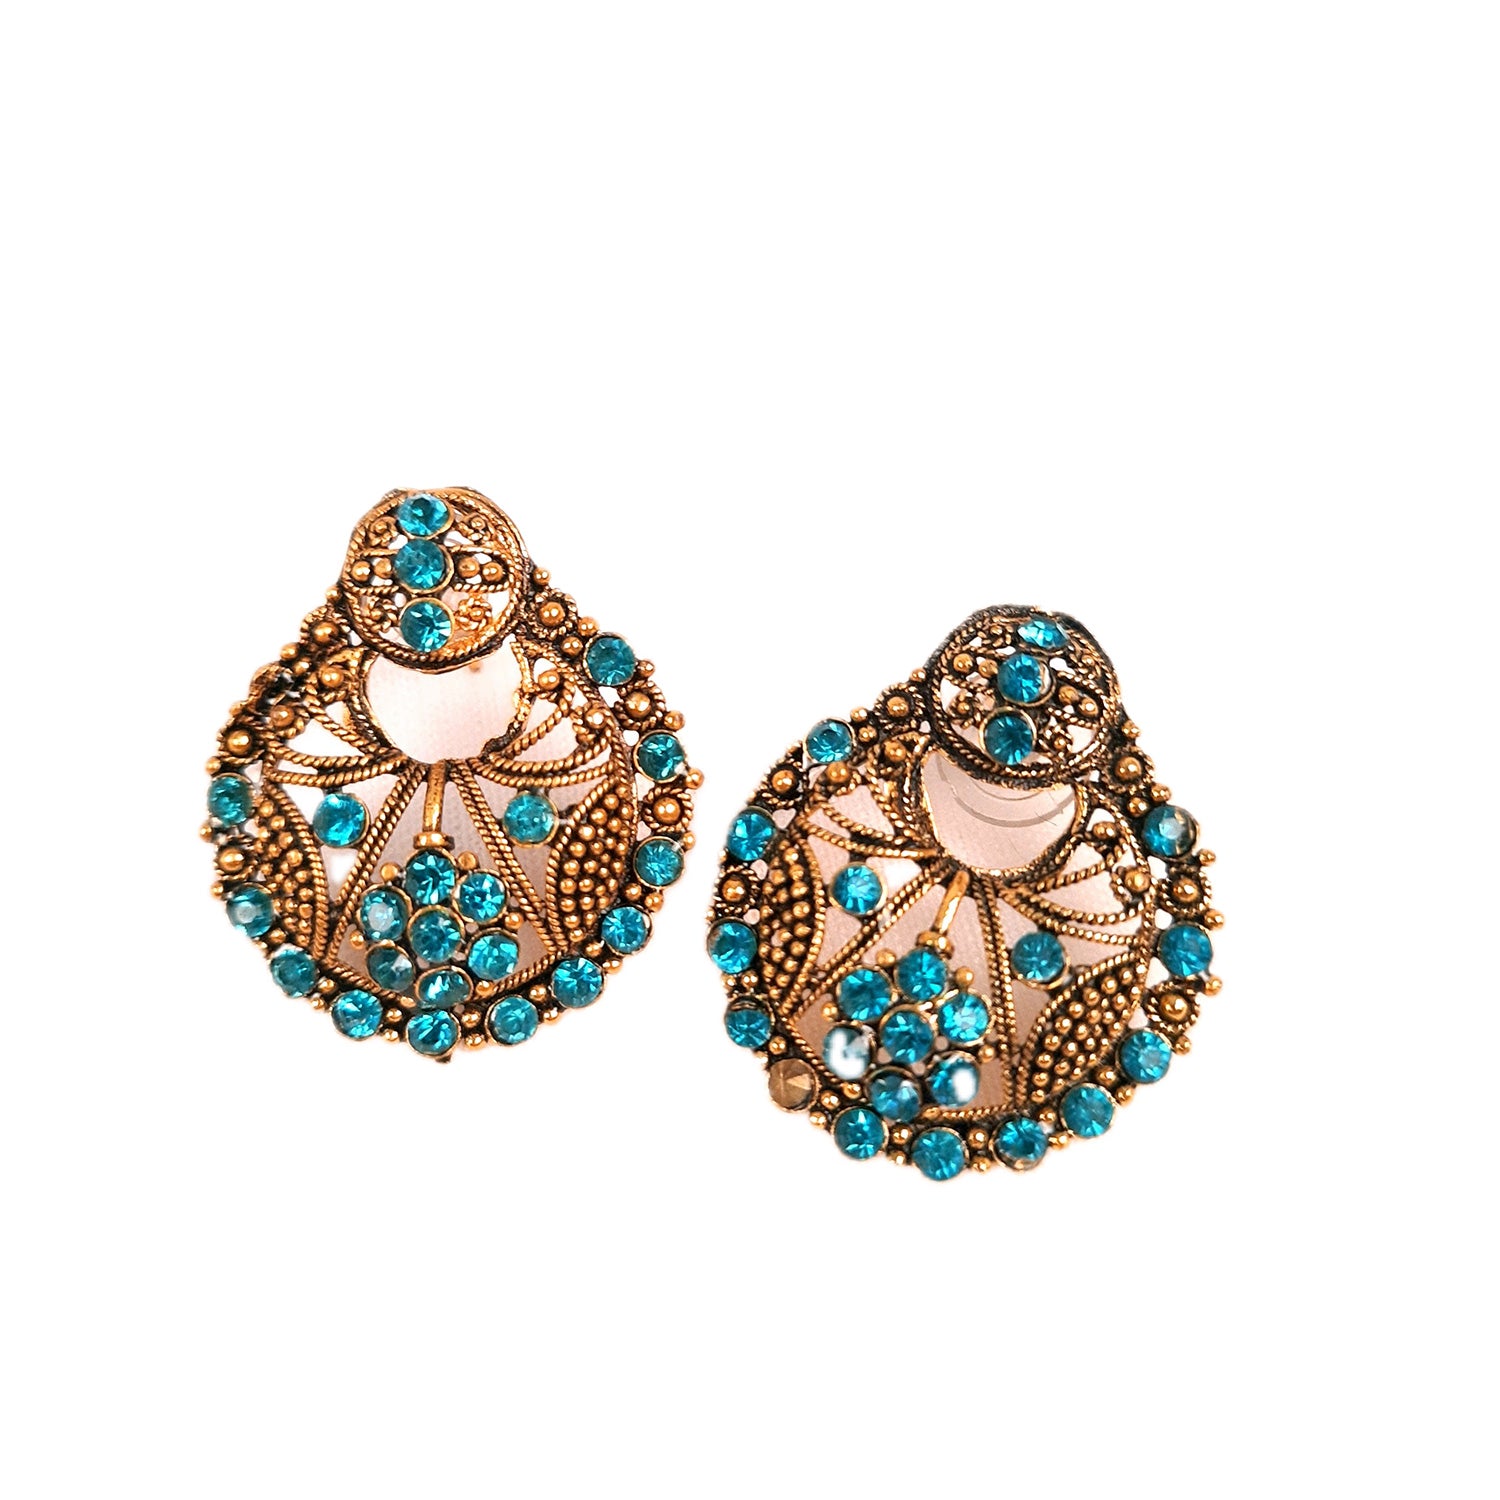 Stone Earrings Stud for Women & Girls | Latest Stylish Fashion Jewellery | Gifts for Her, Friendship Day, Valentine's Day Gift - Apkamart